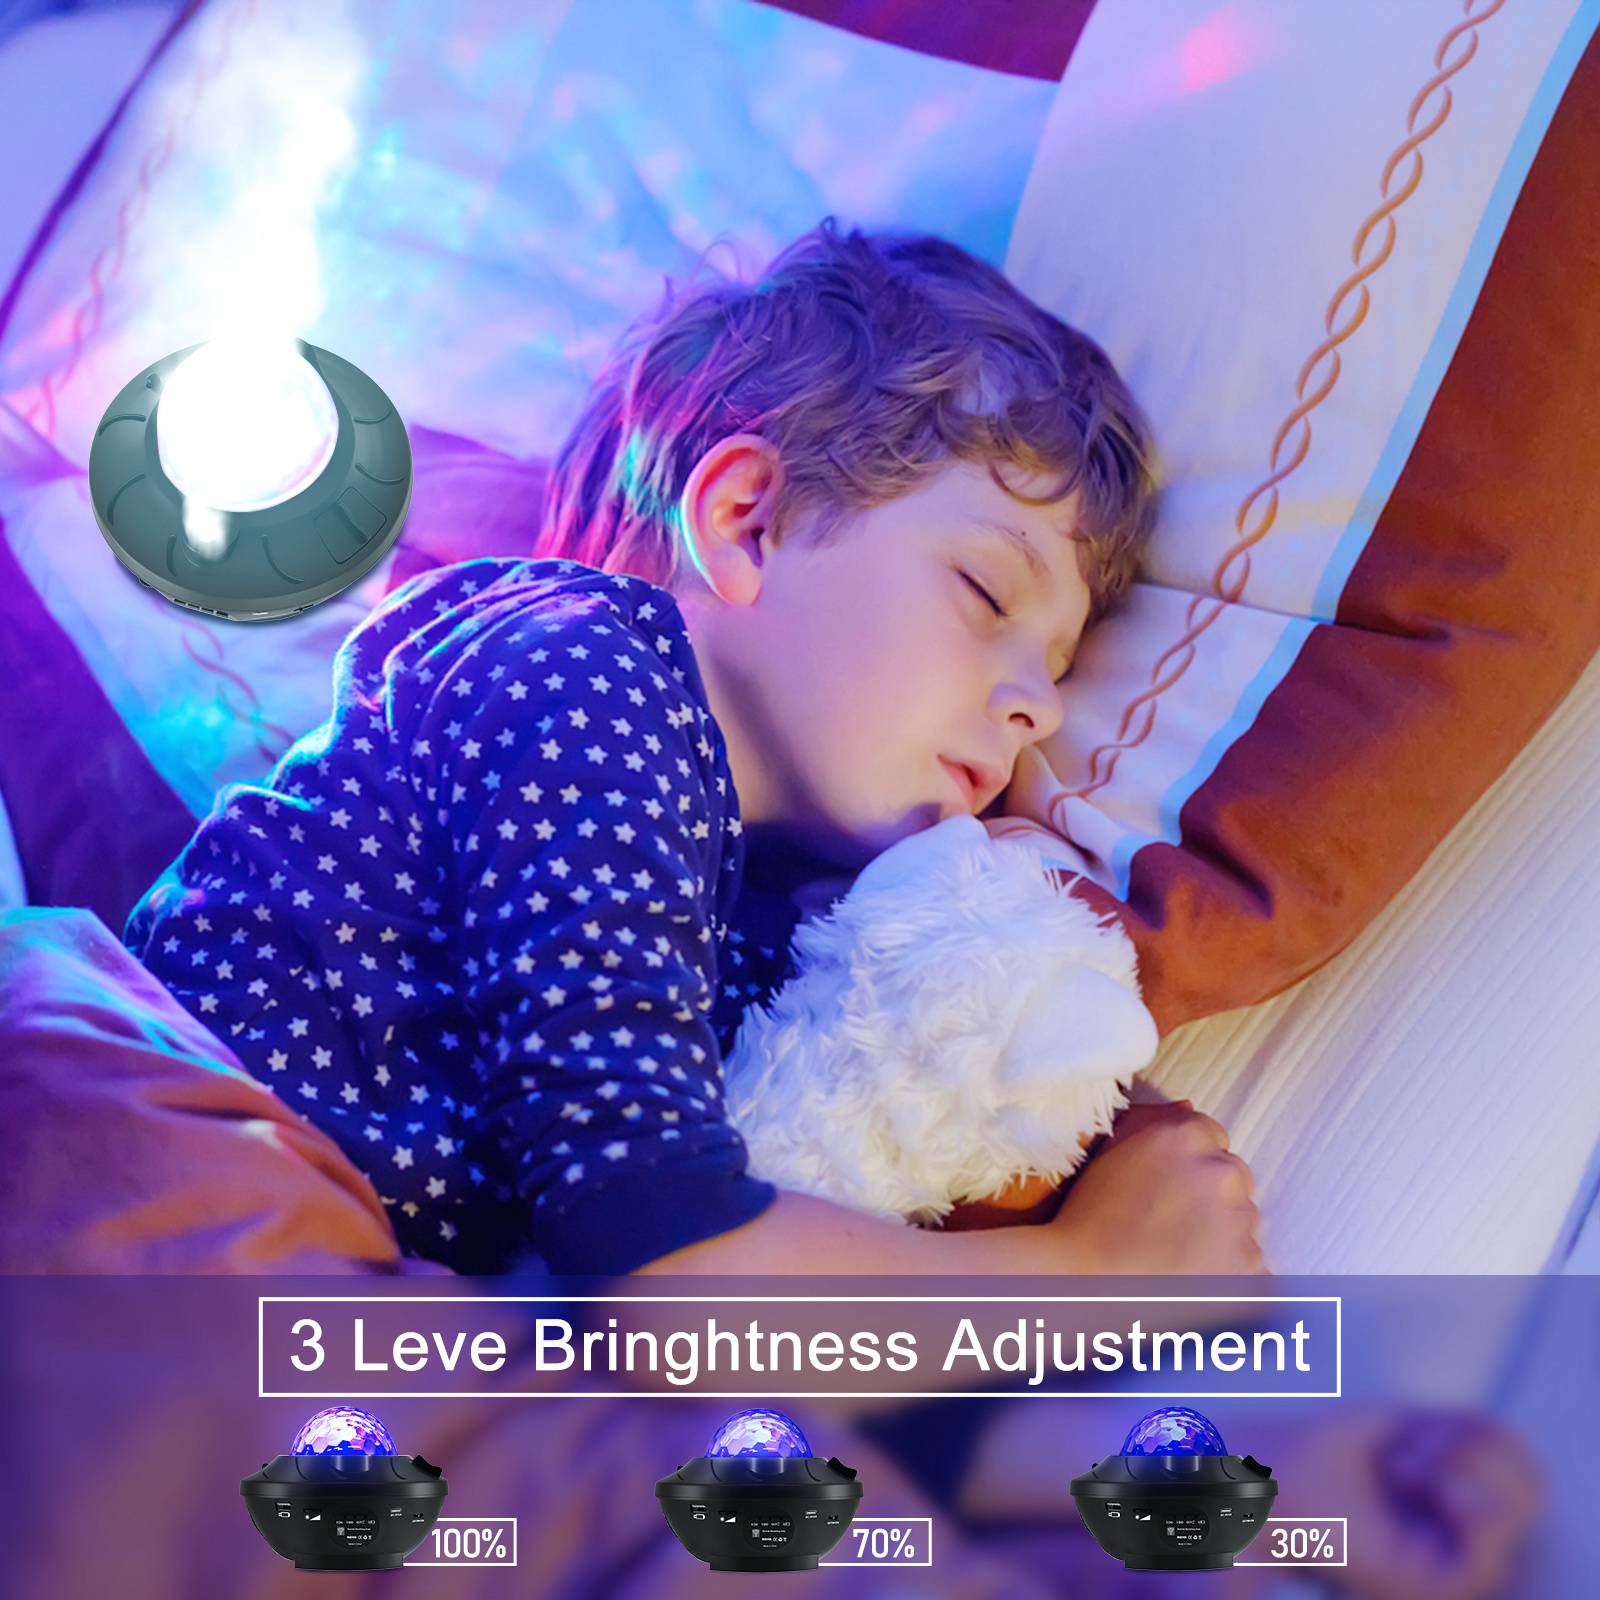 Star Projector Night Light, Star Light Projector for Bedroom,Galaxy Lighting with Bluetooth Music Speaker Timer for Bedroom Decoration Kids Party Birthday Gifts for Girls Boys